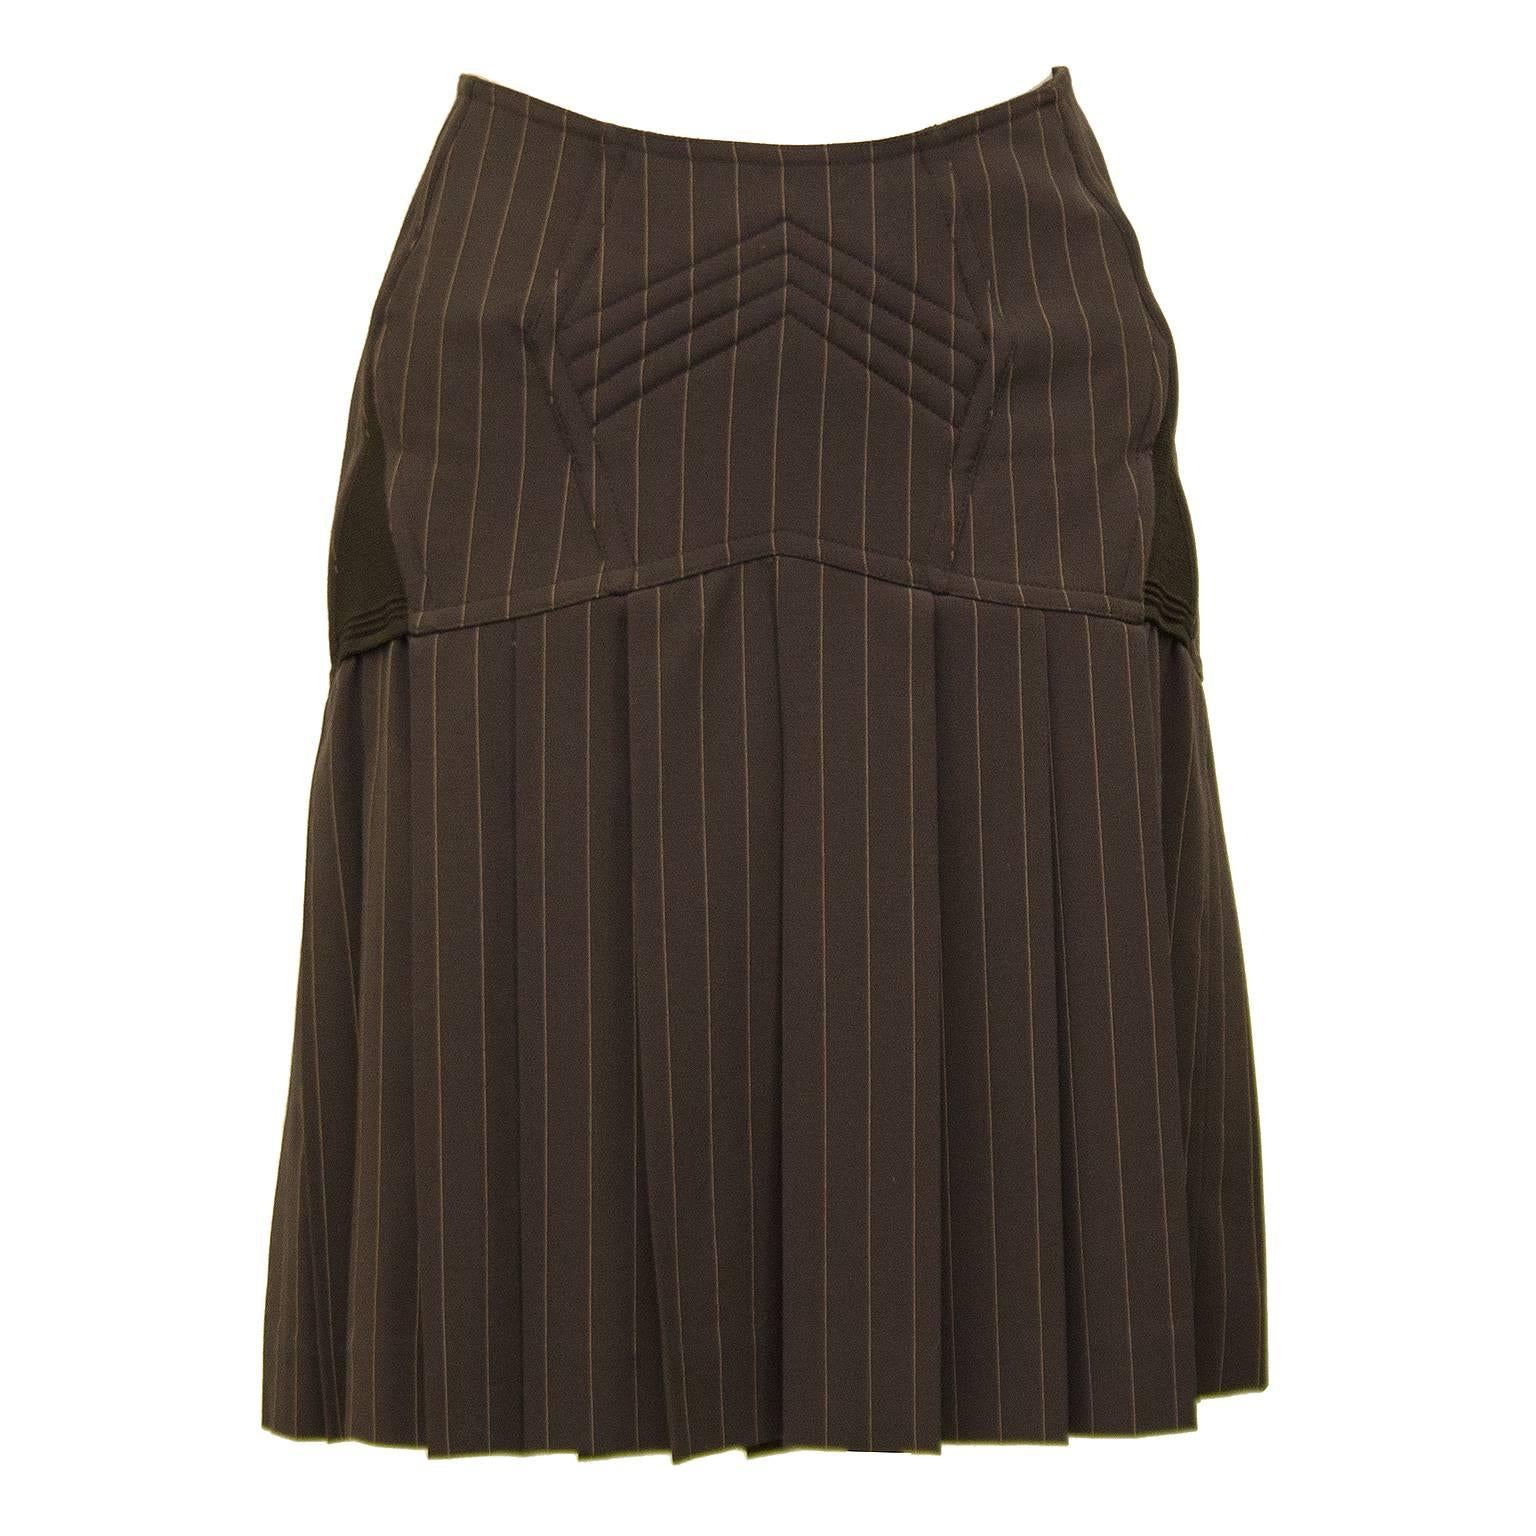 1990s Jean Paul Gaultier brown on brown pin stripe mini skirt. Drop waist with boning at butt, corset lacing up the back and pleated skirt. Chevron stitching details at front and elastic darts at side seams. Silver metal zipper closure. Brown silk